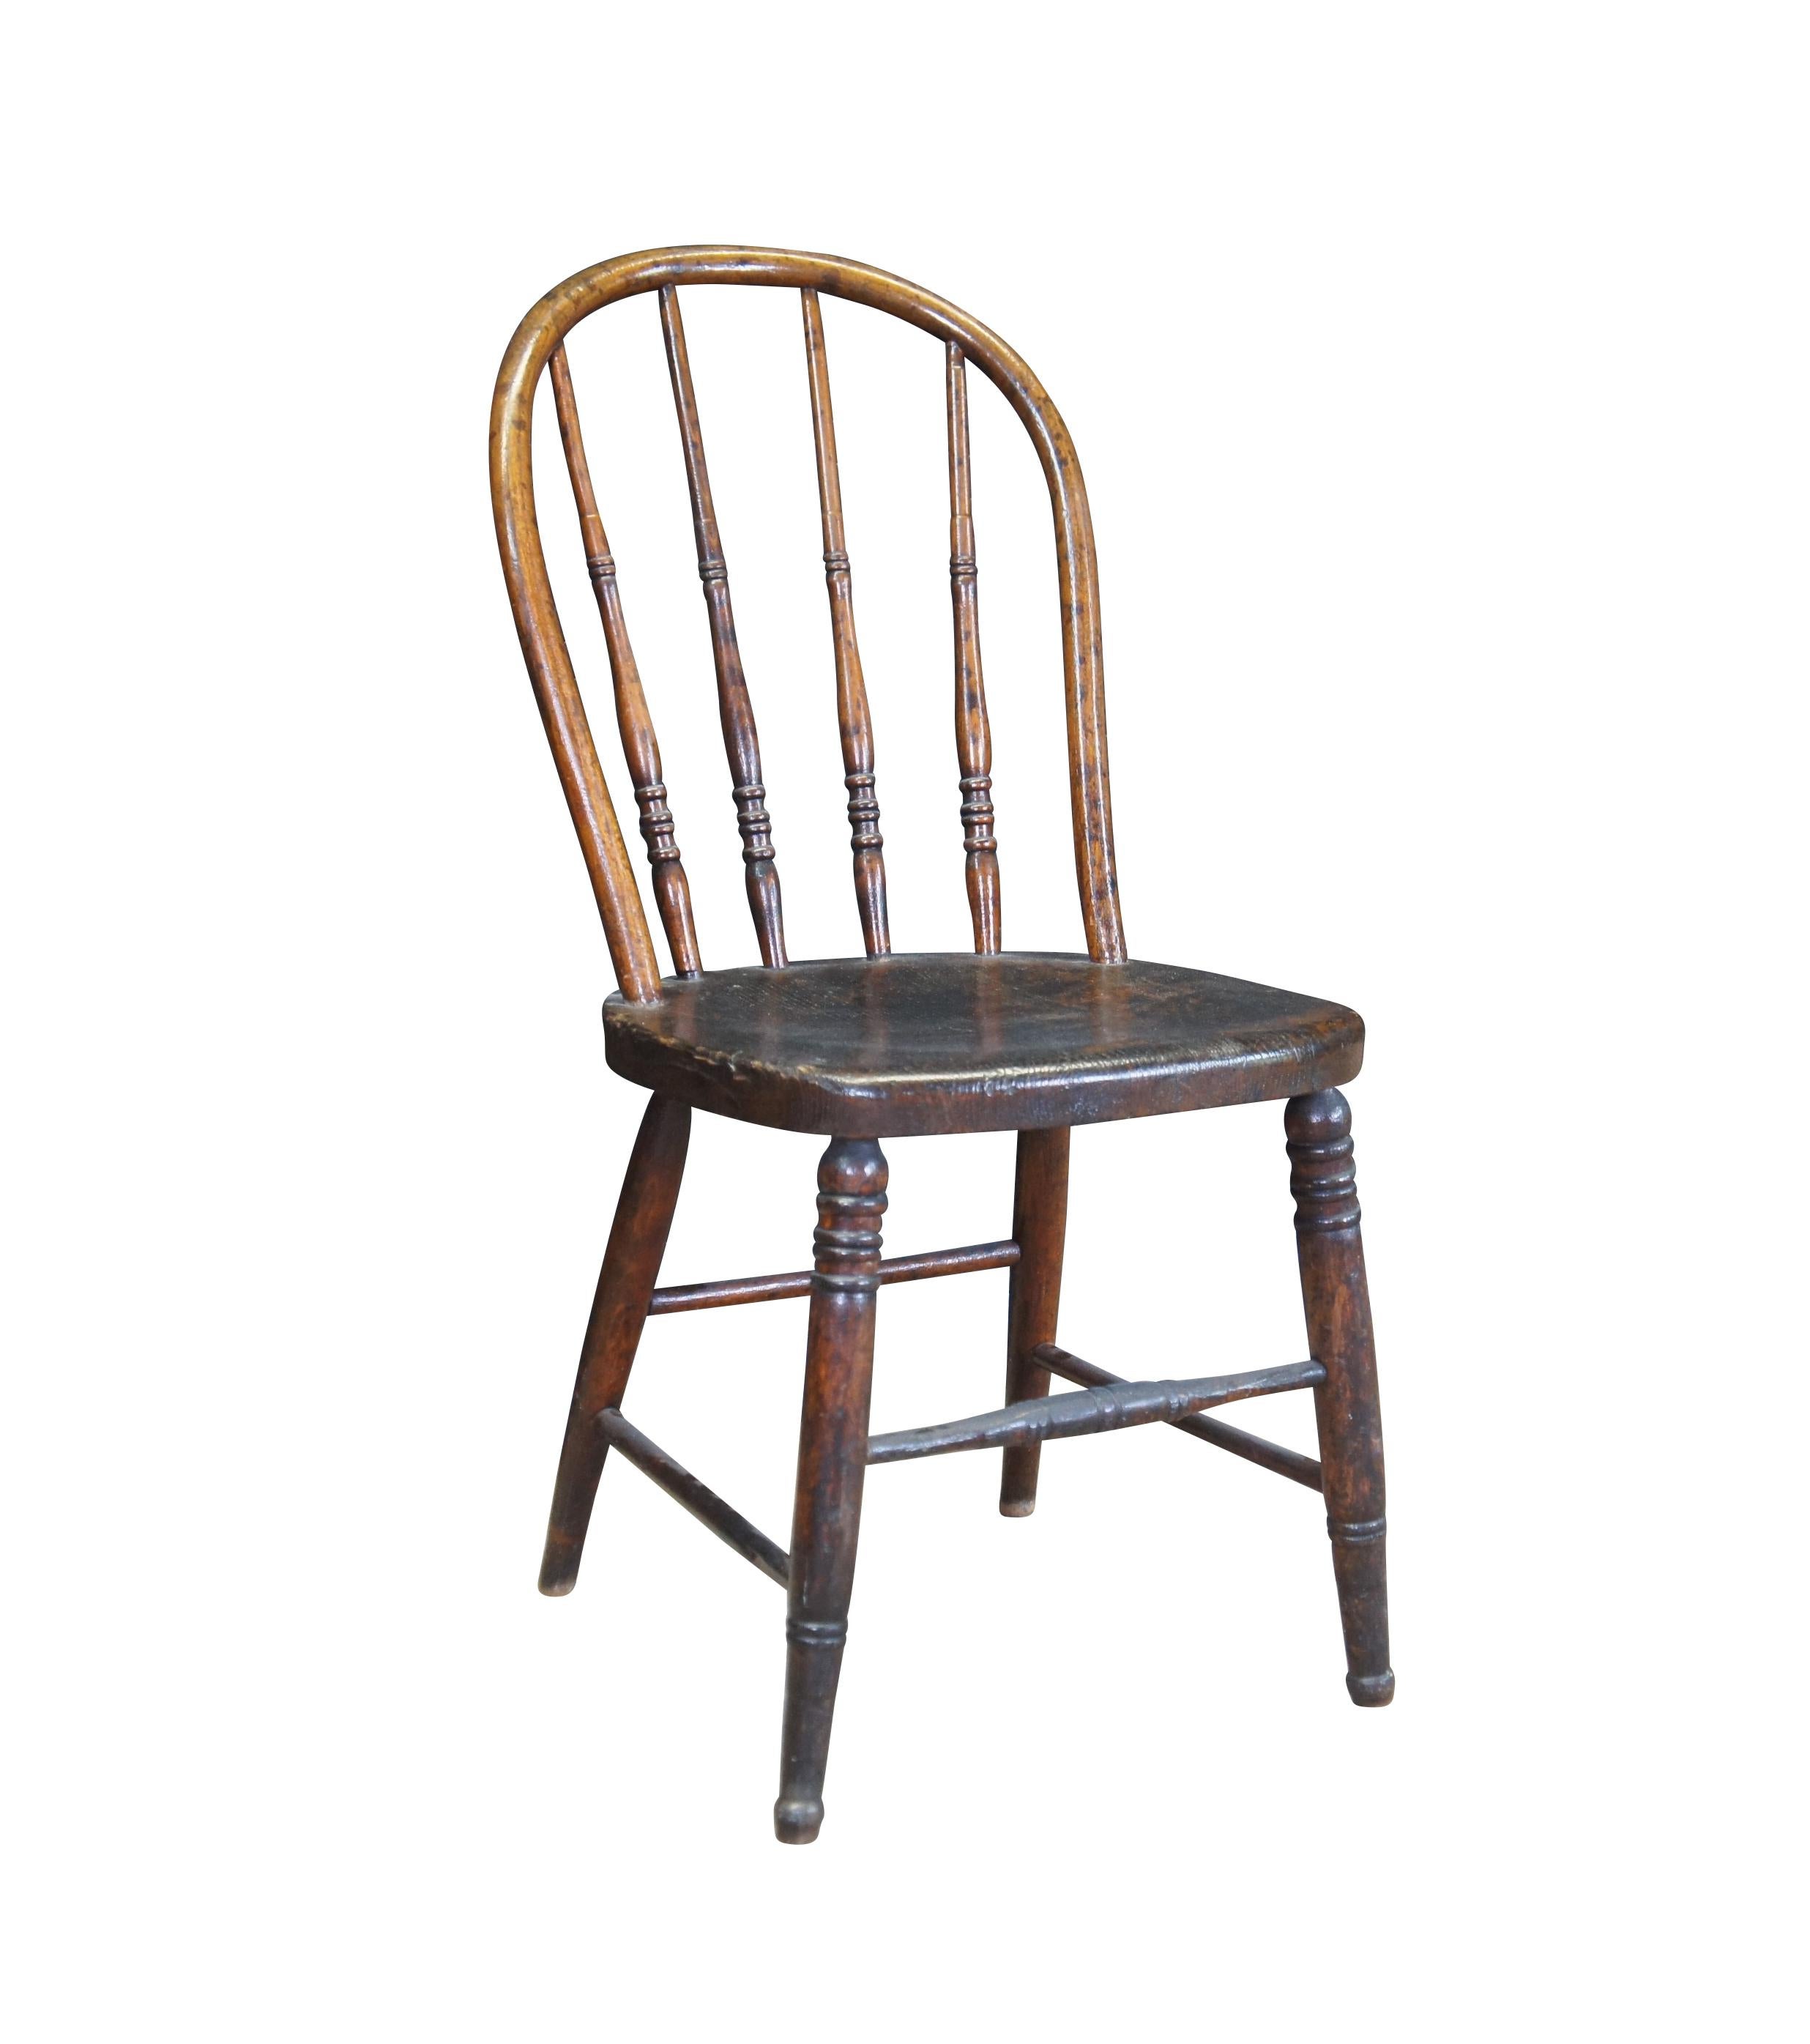 Quaint antique windsor bowback chair. Made from oak with a warm brown finish. Features a turned spindle back over plank seat and turned legs connected by stretchers.